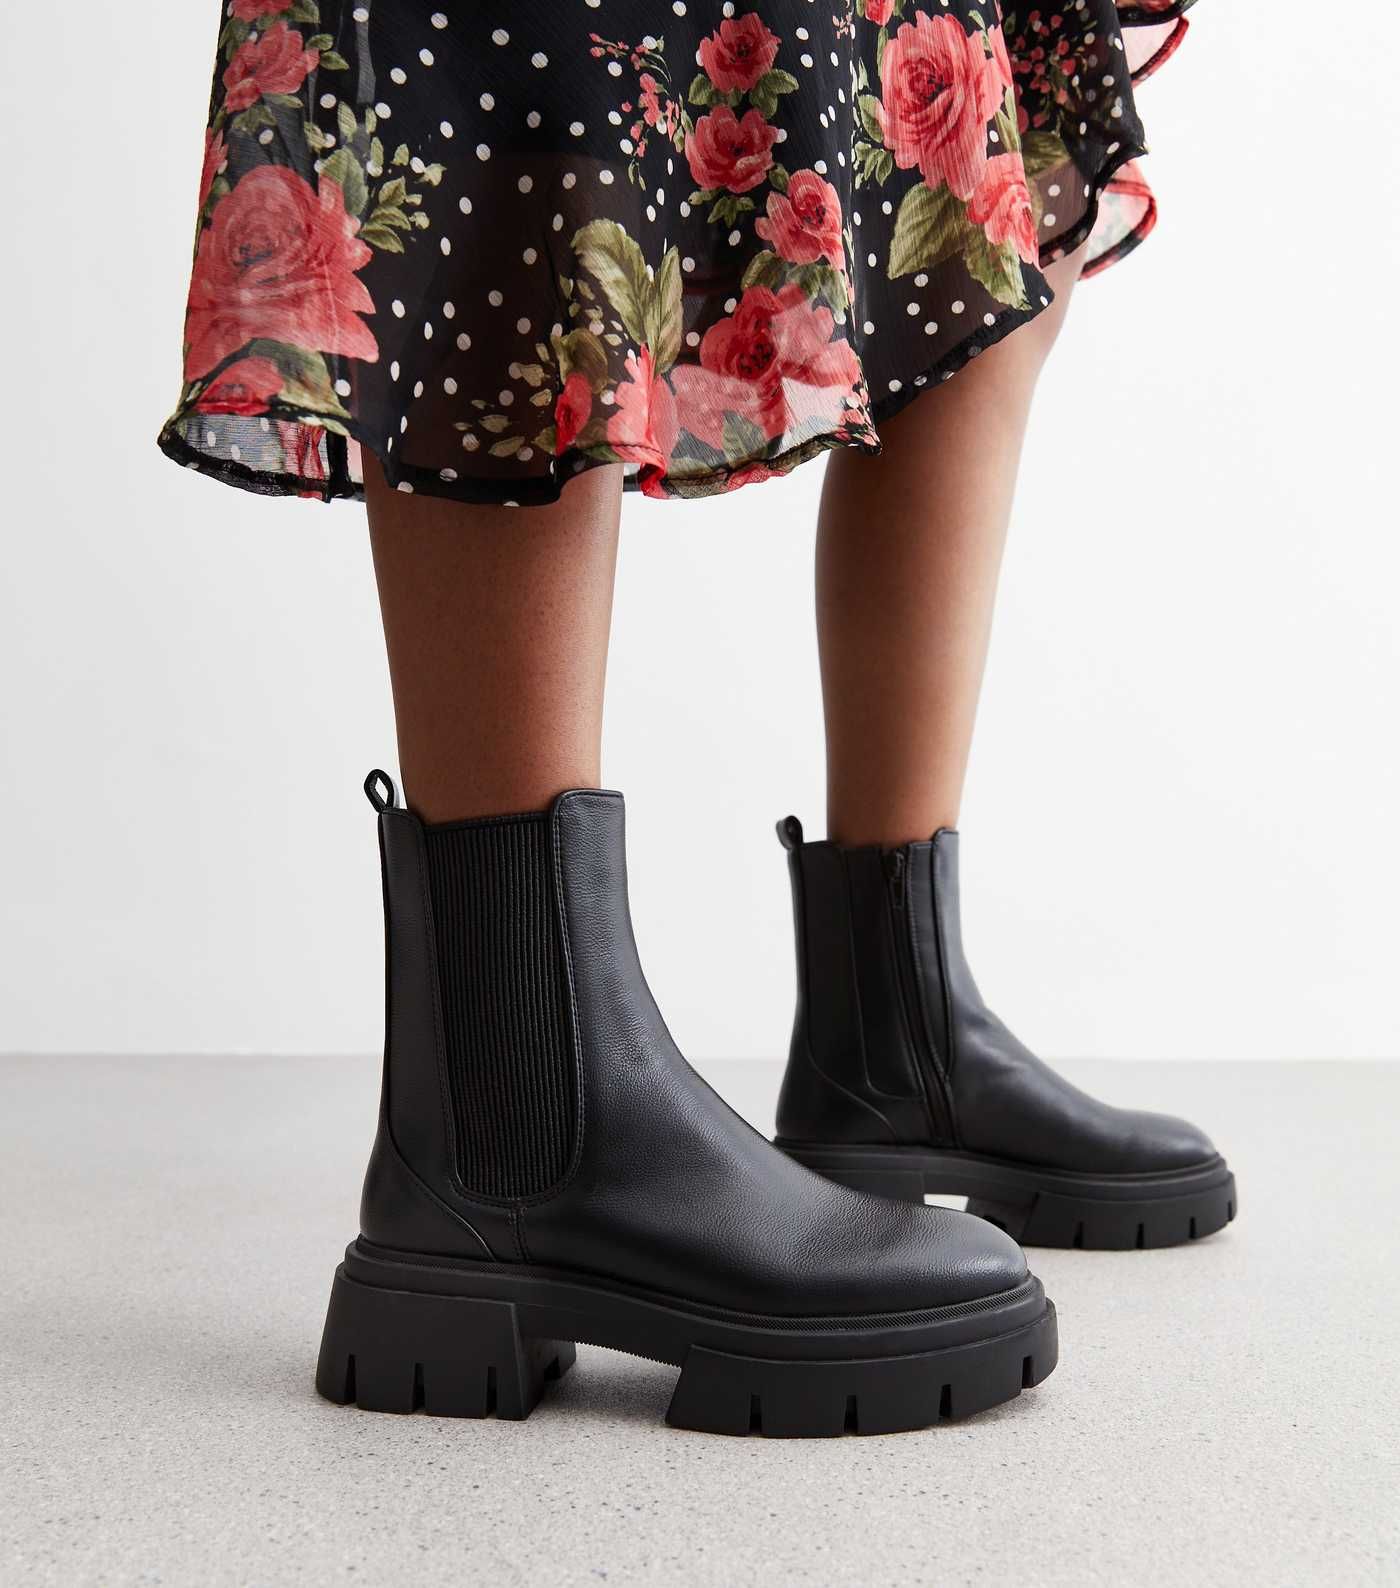 Black Leather-Look Chunky Cleated Sole Chelsea Boots
						
						Add to Saved Items
						Remove... | New Look (UK)